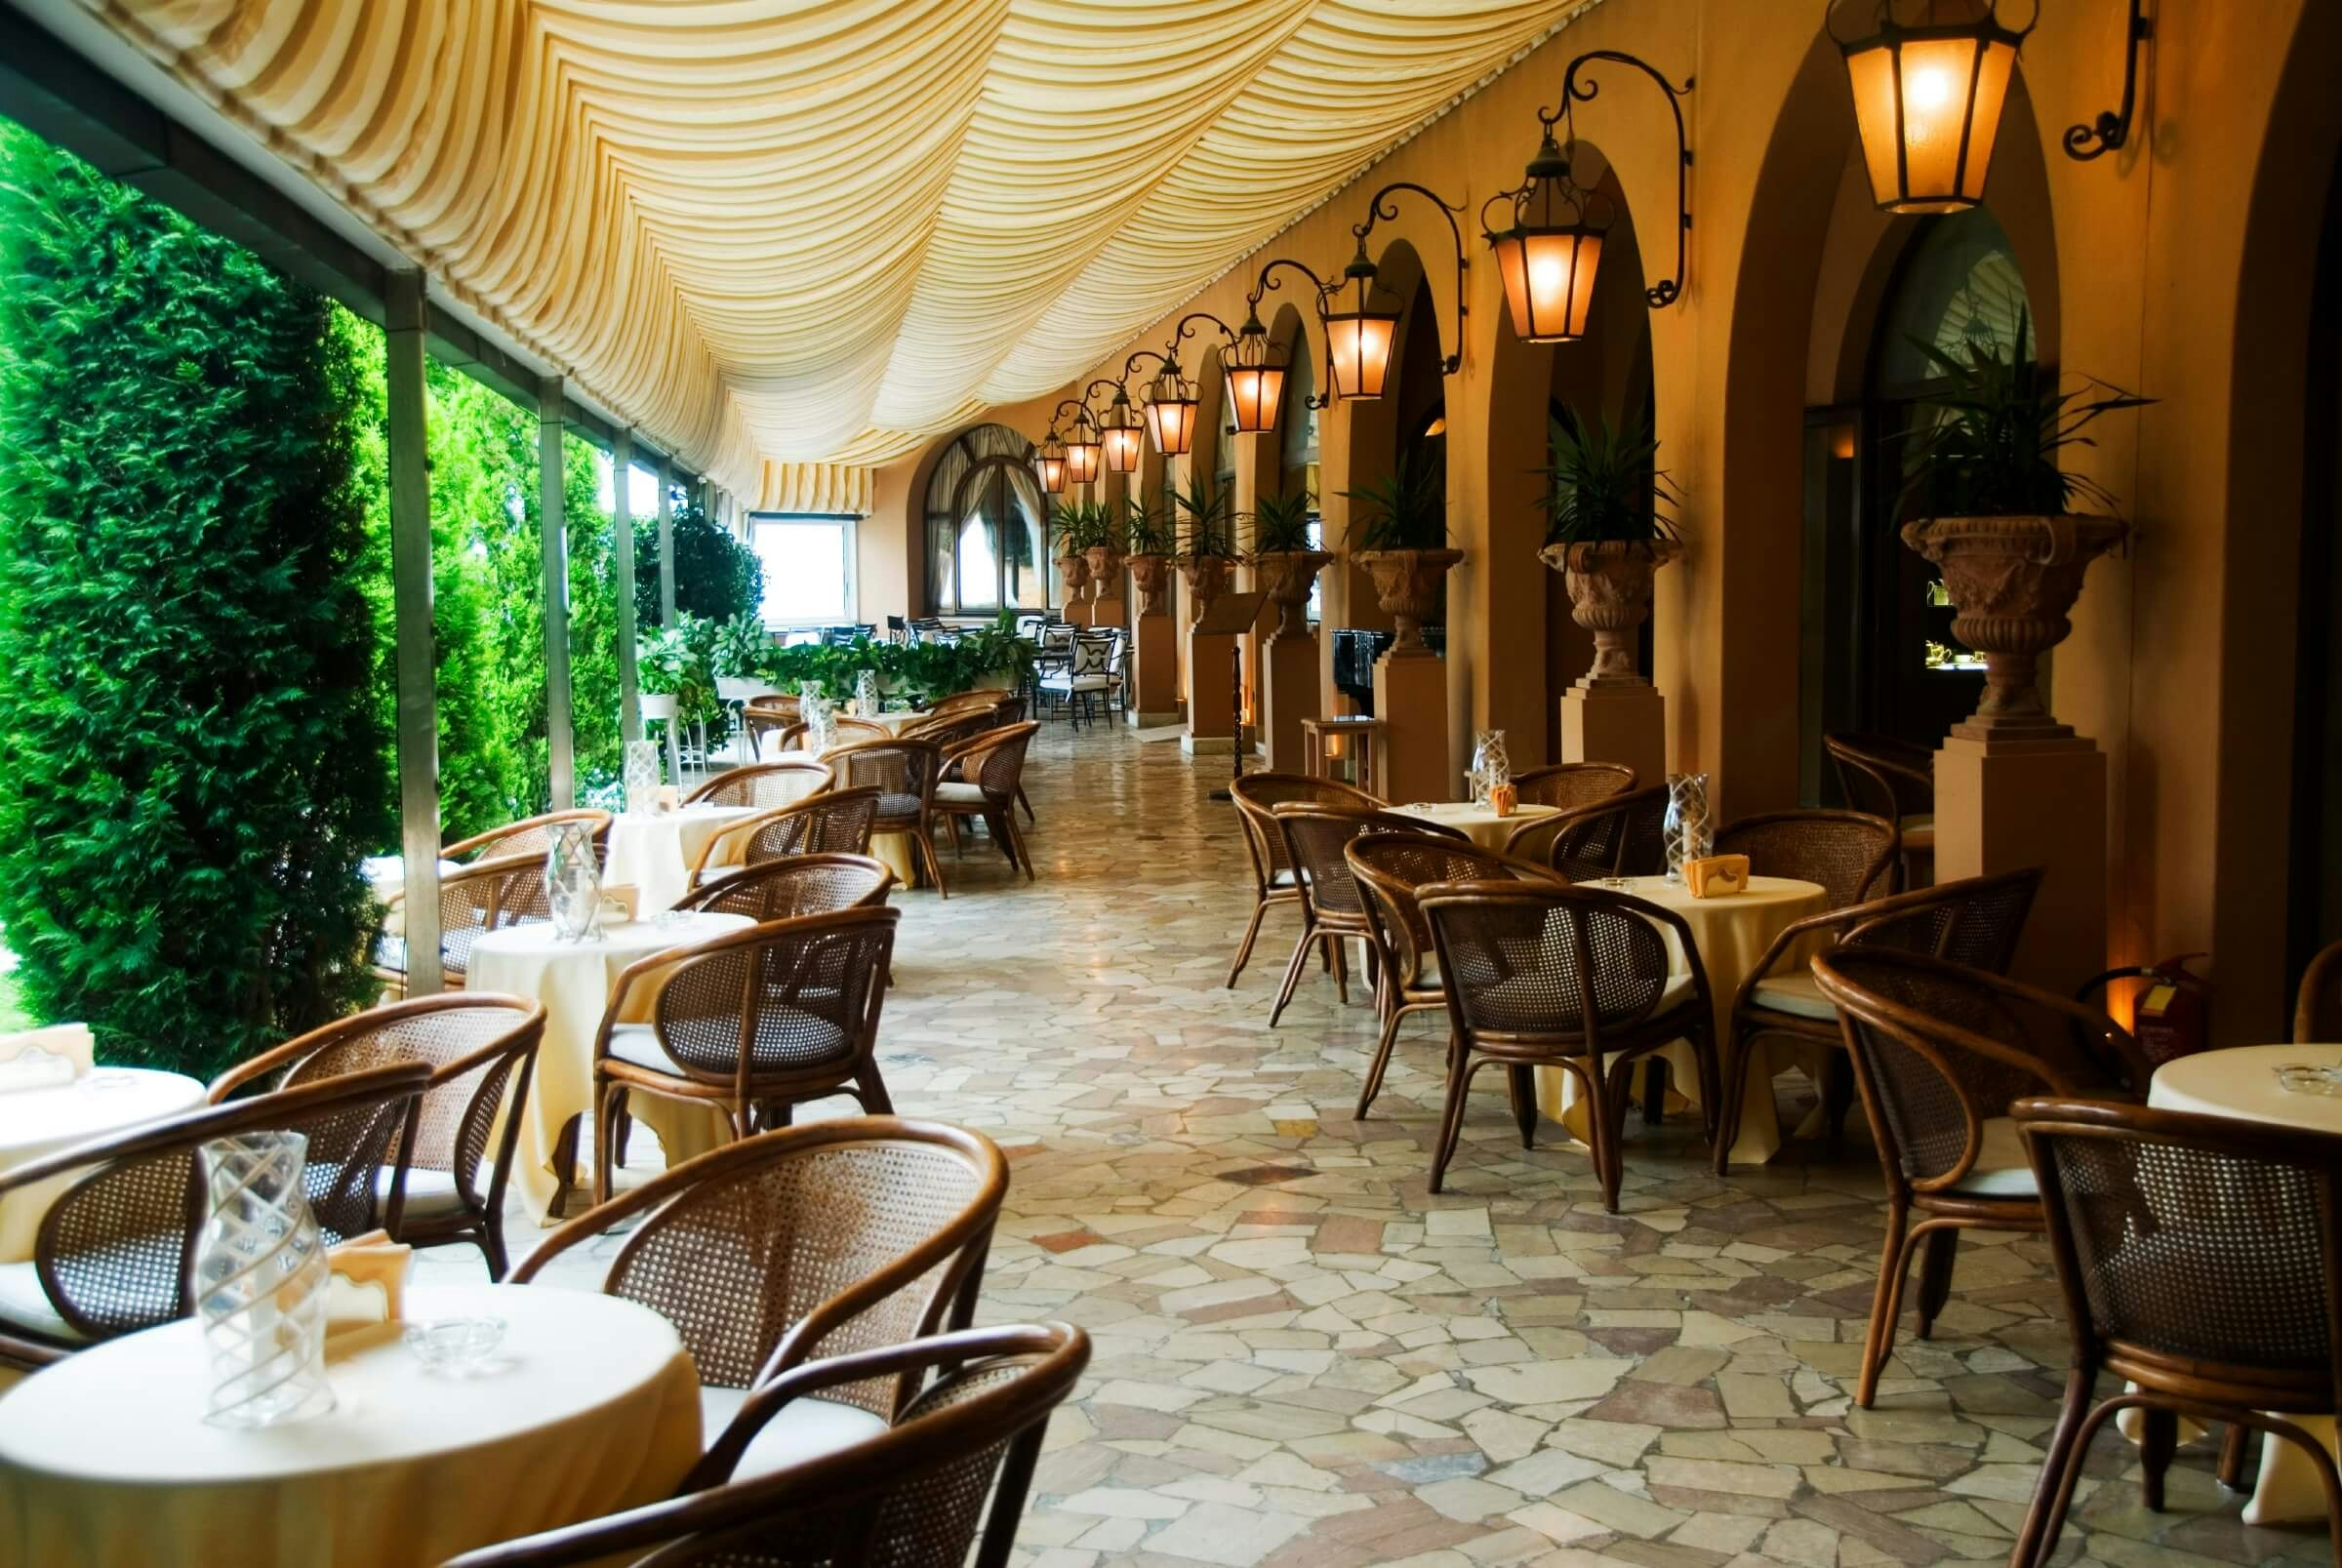 A covered outdoor terrace dining room, empty of people.